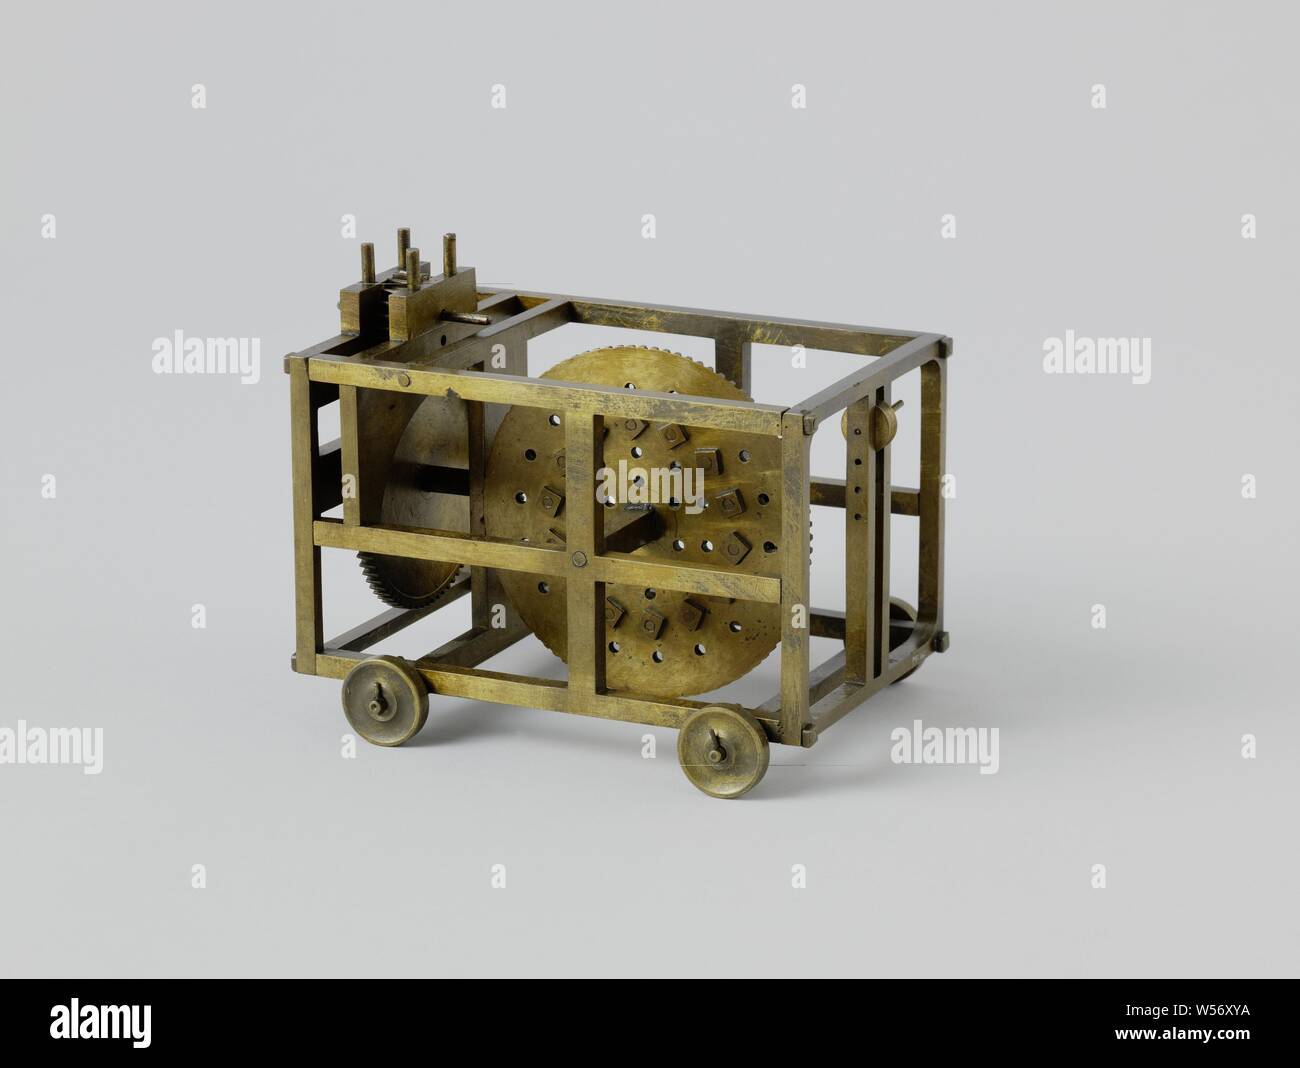 Model of a Cart for Rope Making, A cart for rope-making, consisting of a brass frame on wheels, equipped with a wheel. The large wheel of the gear is arranged in the longitudinal direction and has a large number of holes for supports arranged in concentric circles, on which rope is rolled up. The trolley only has one swivel hook., anonymous, Netherlands, c. 1800 - c. 1825, brass (alloy), iron (metal), h 14.8 cm × w 16.6 cm × d 12.5 cm Stock Photo